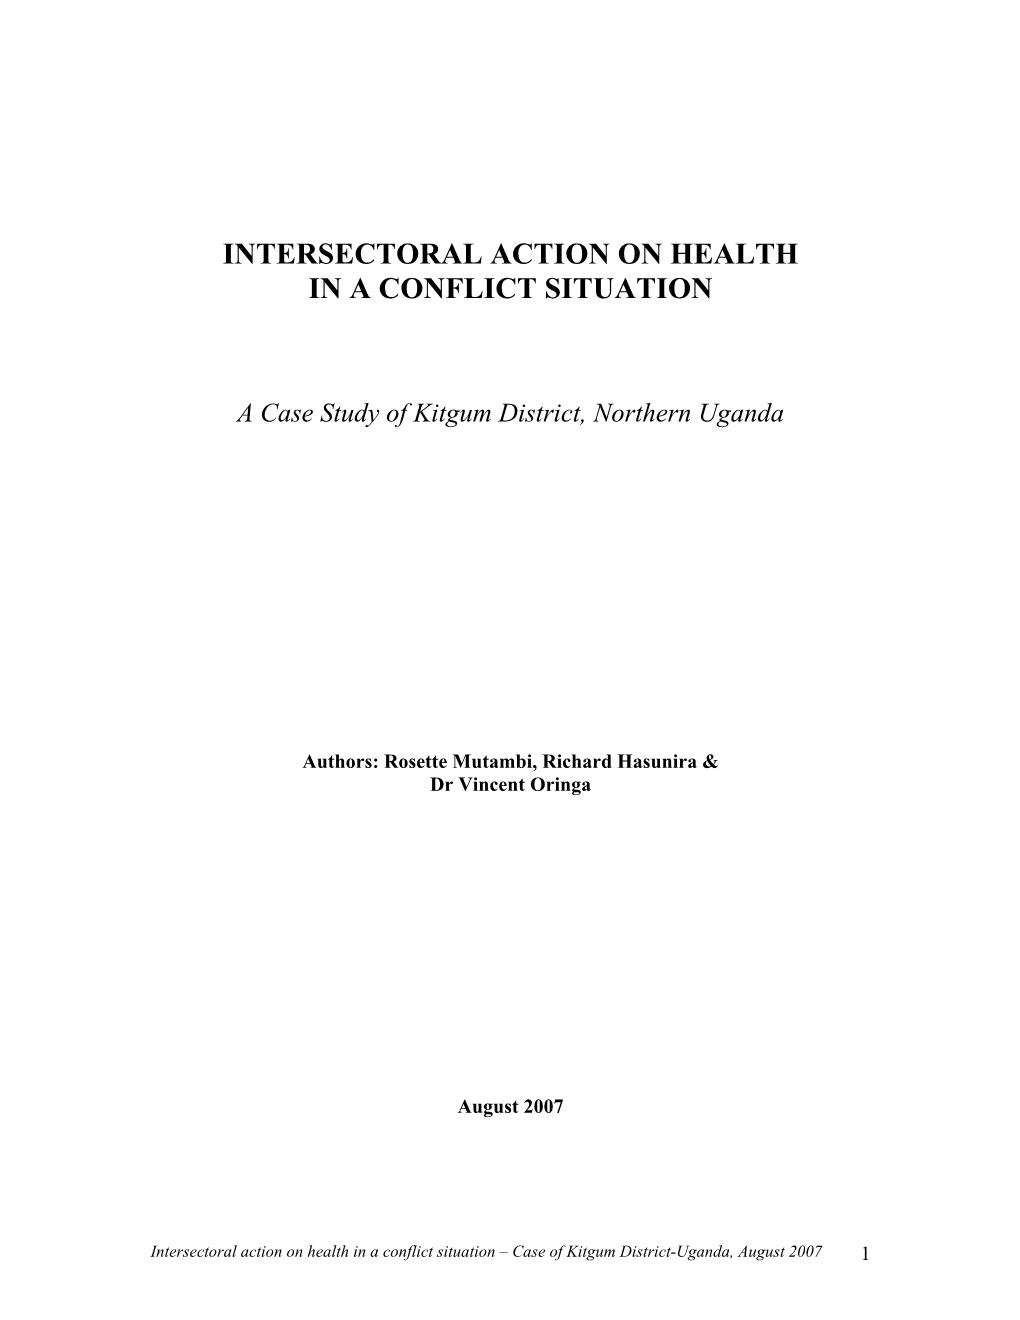 Intersectoral Action on Health in a Conflict Situation